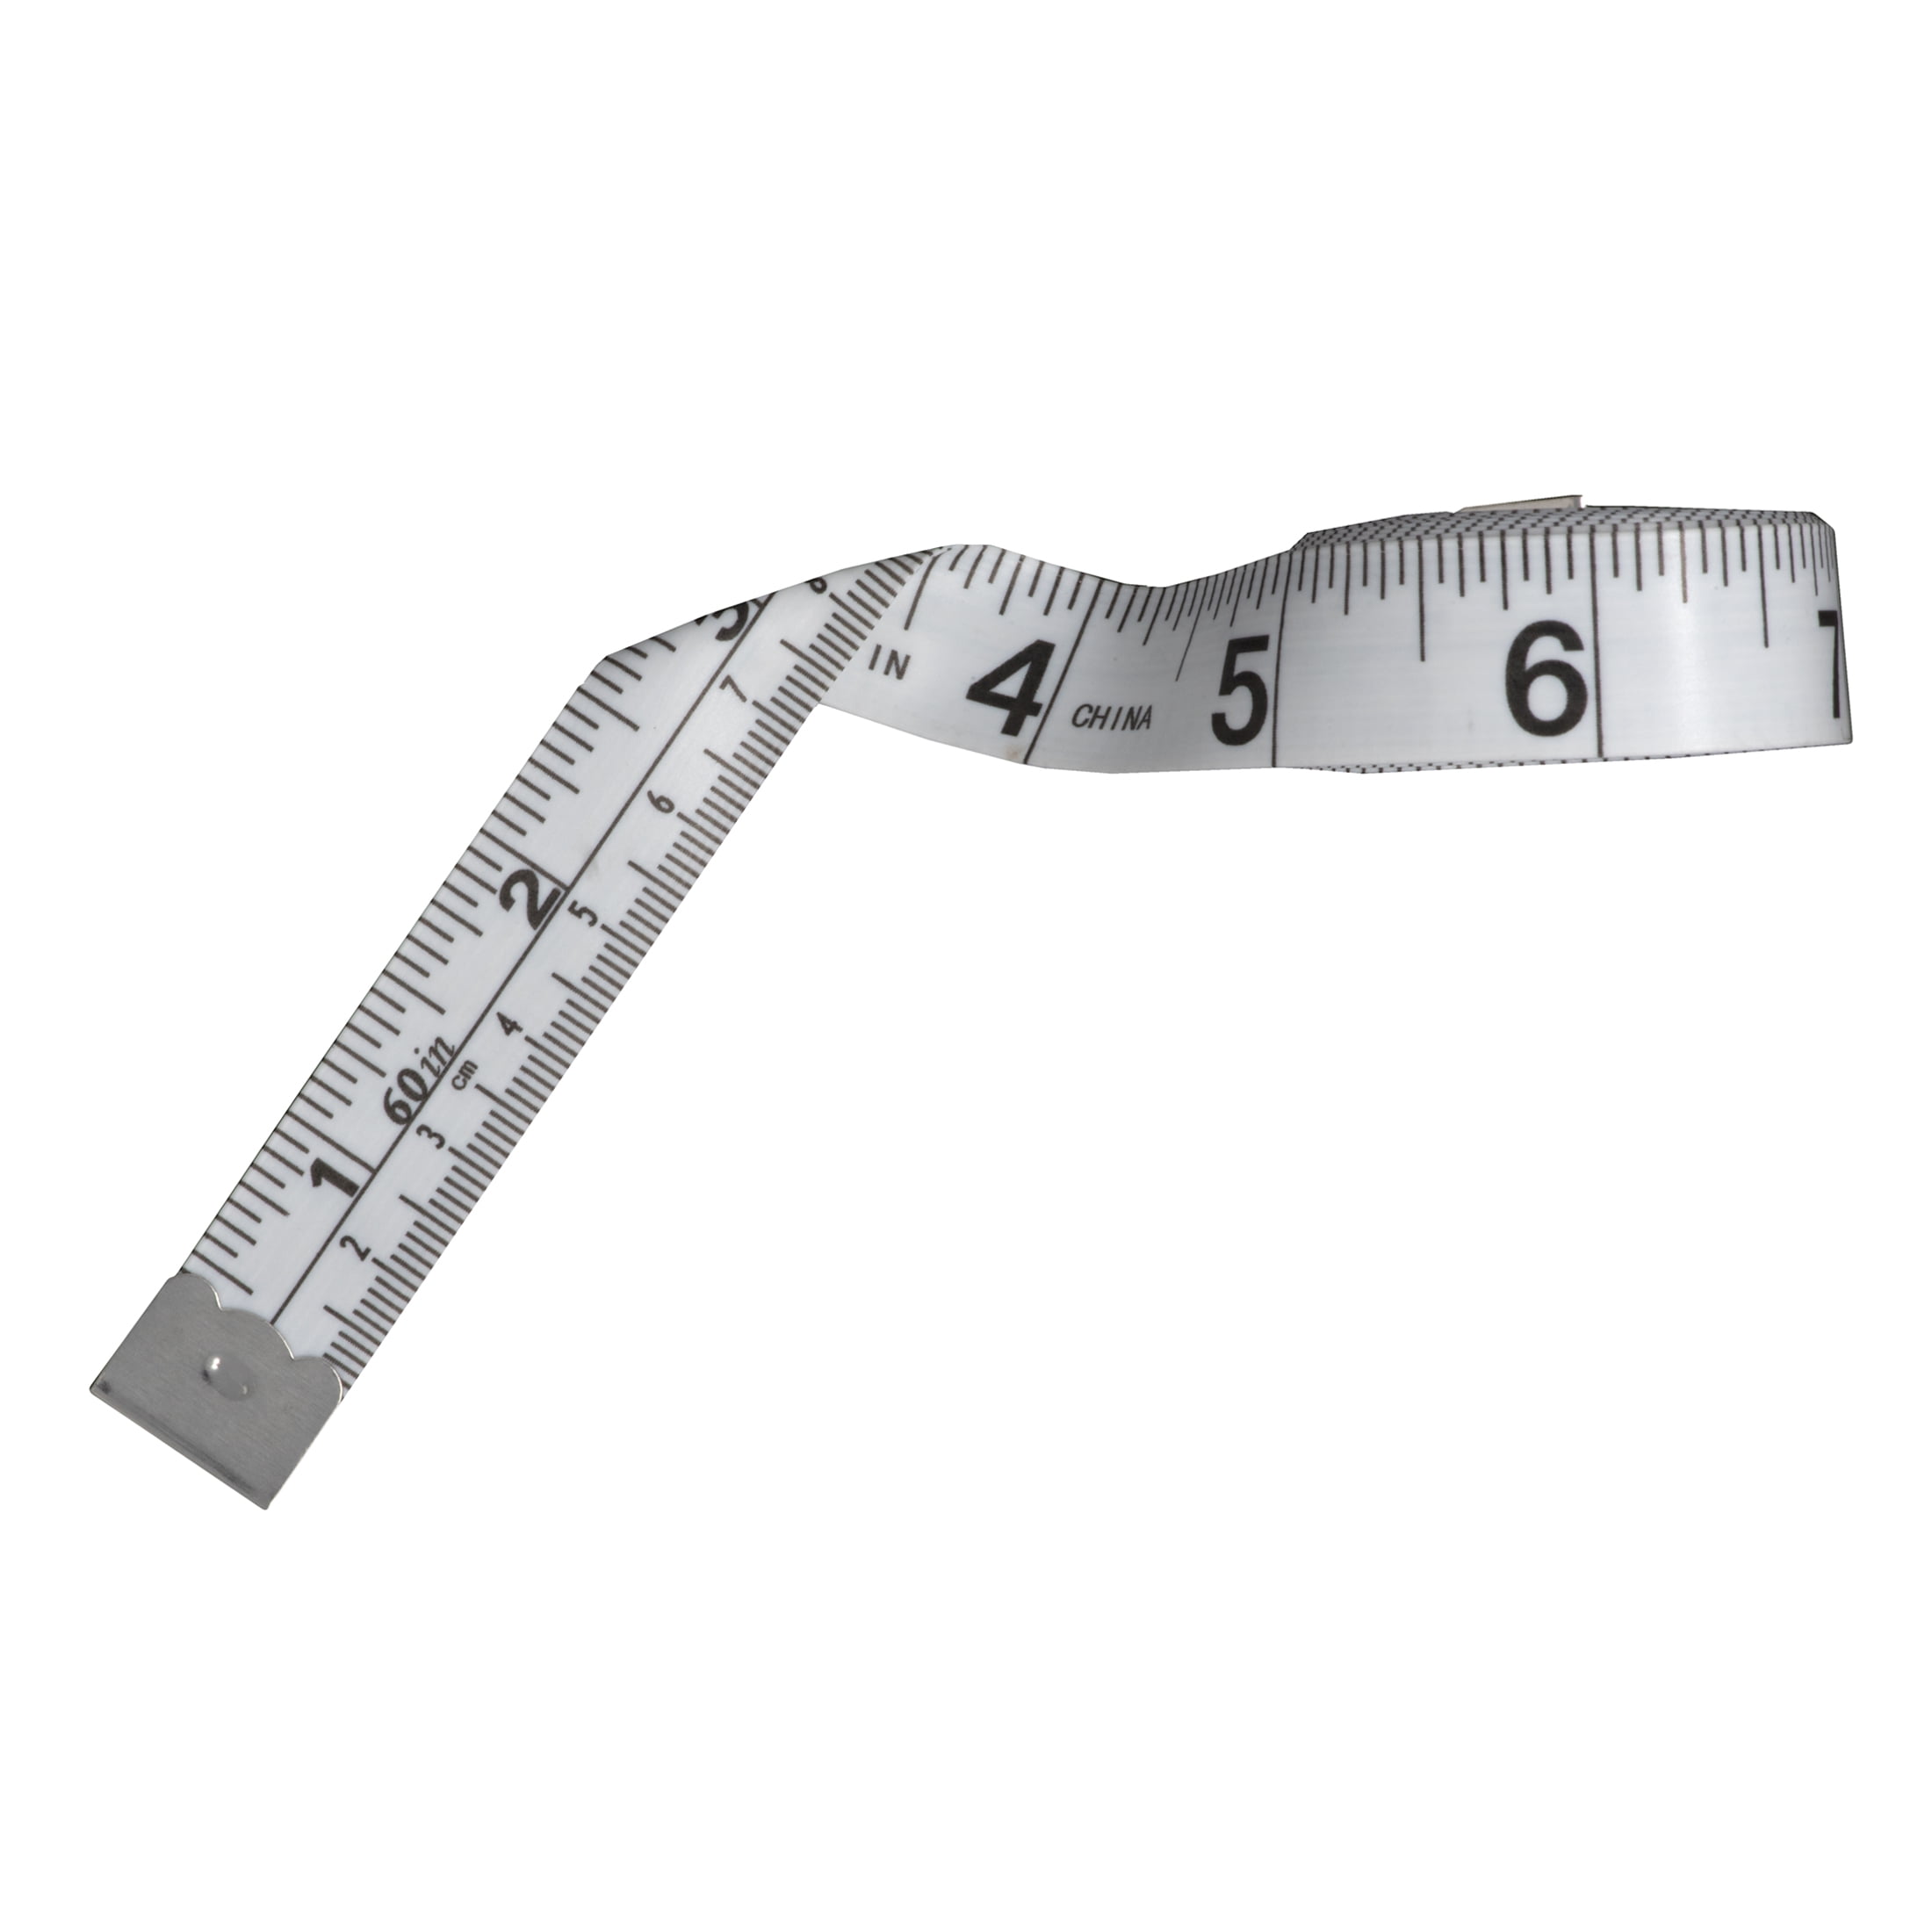 Dritz Retractable 60 Tape Measure - All About Fabrics